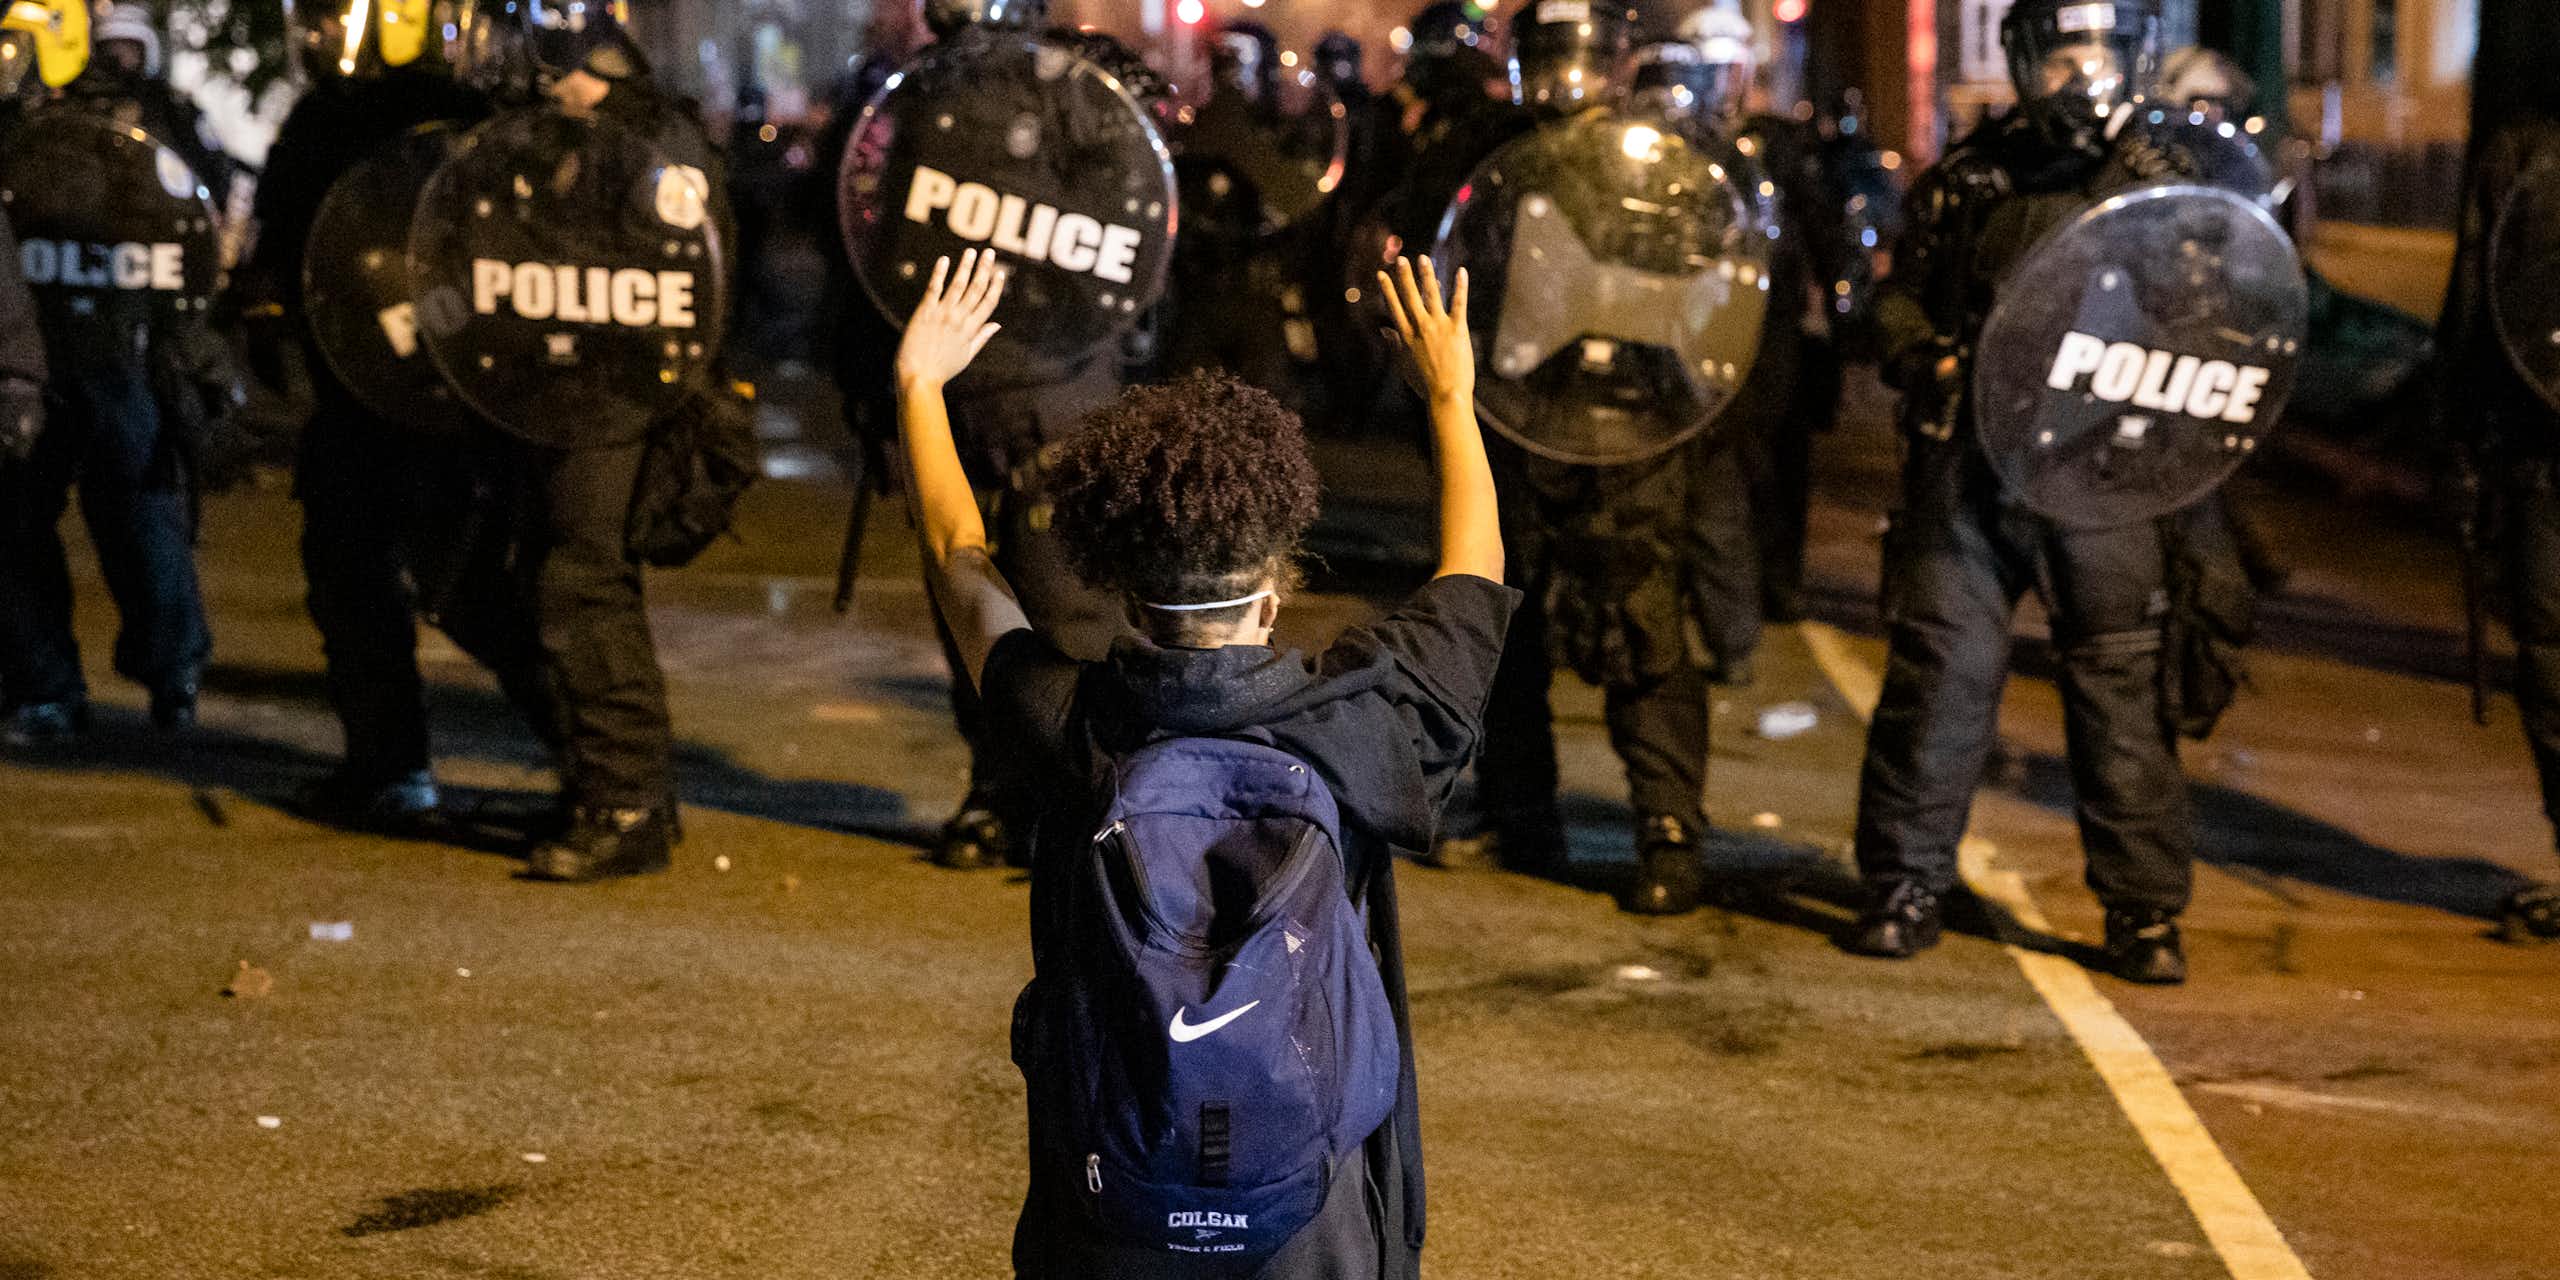 A person wearing a backpack kneels and holds their hands above their head as police in helmets and carrying shields approach.